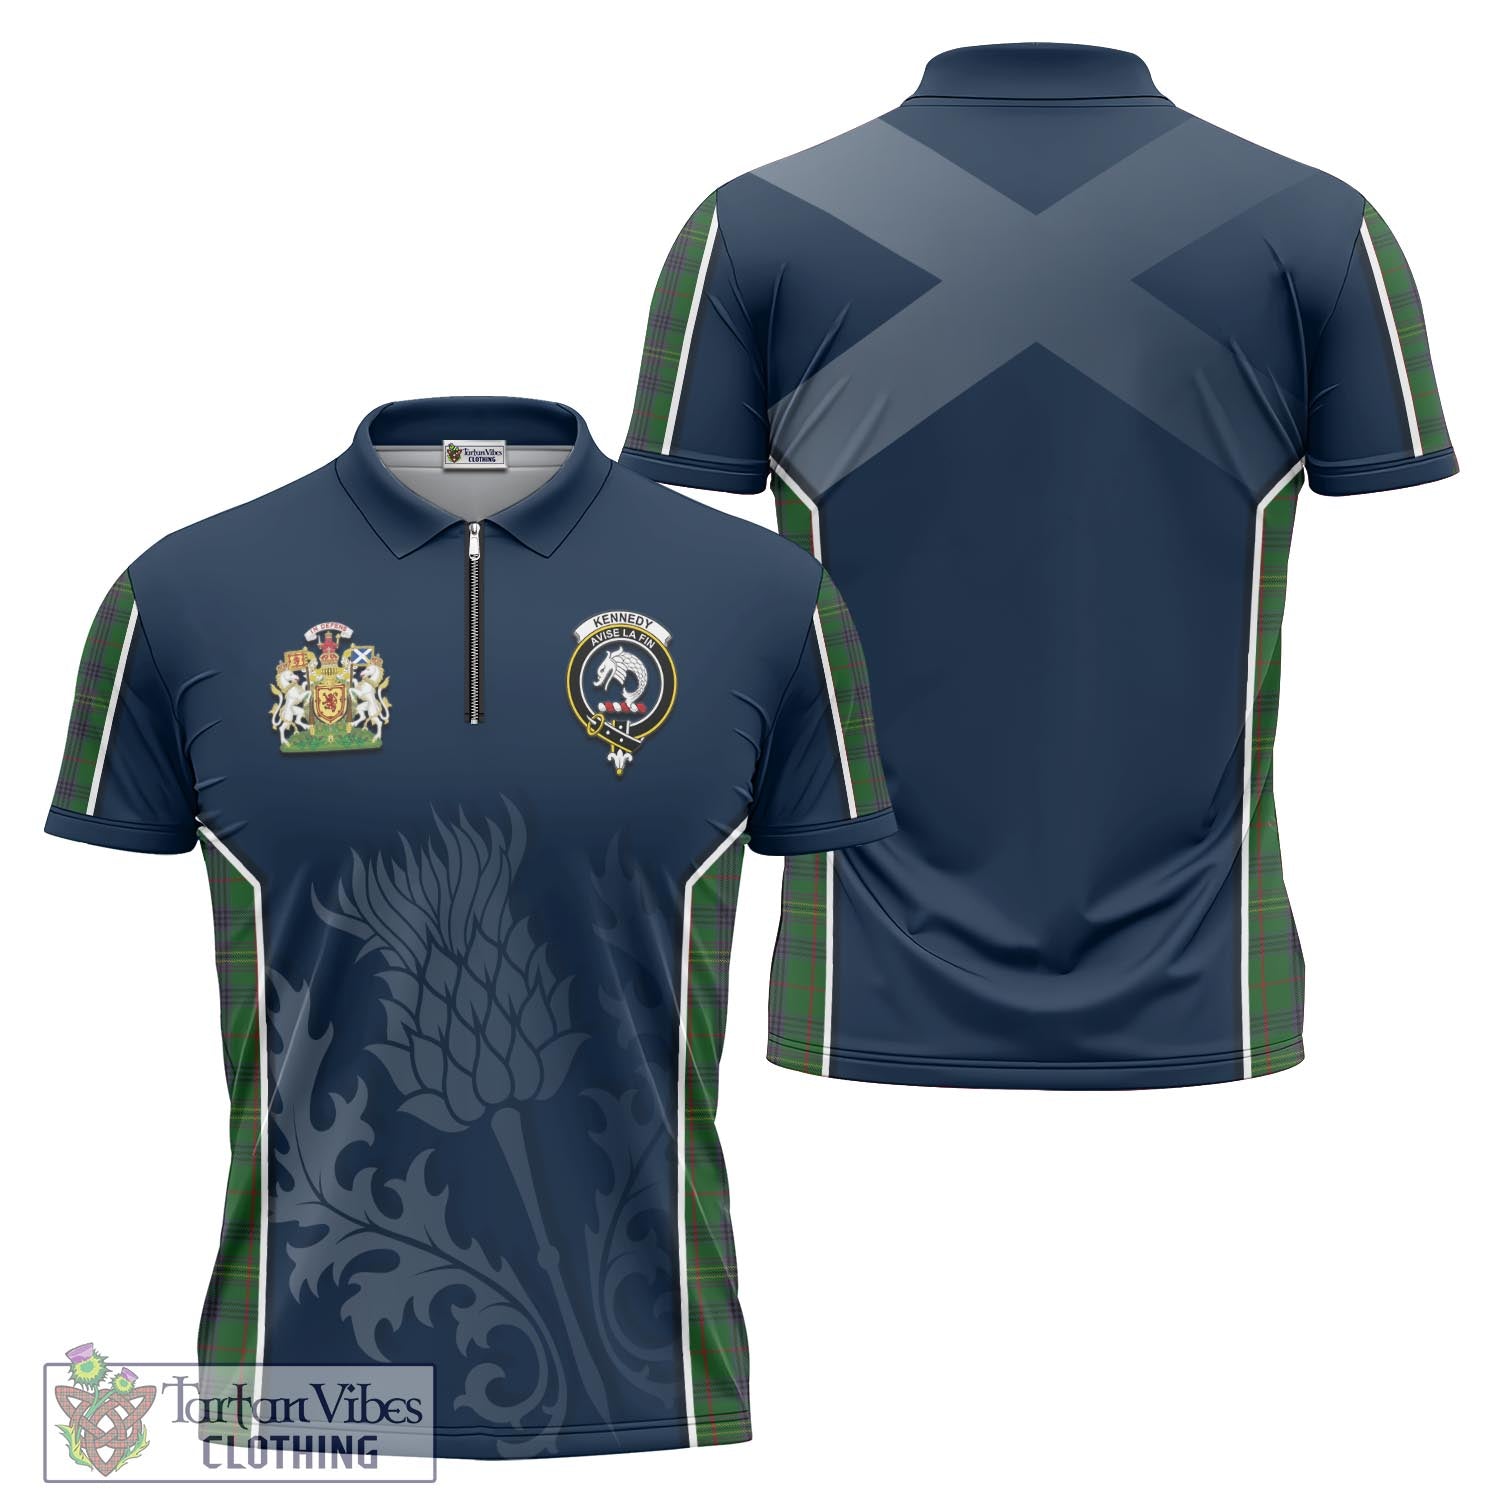 Tartan Vibes Clothing Kennedy Tartan Zipper Polo Shirt with Family Crest and Scottish Thistle Vibes Sport Style